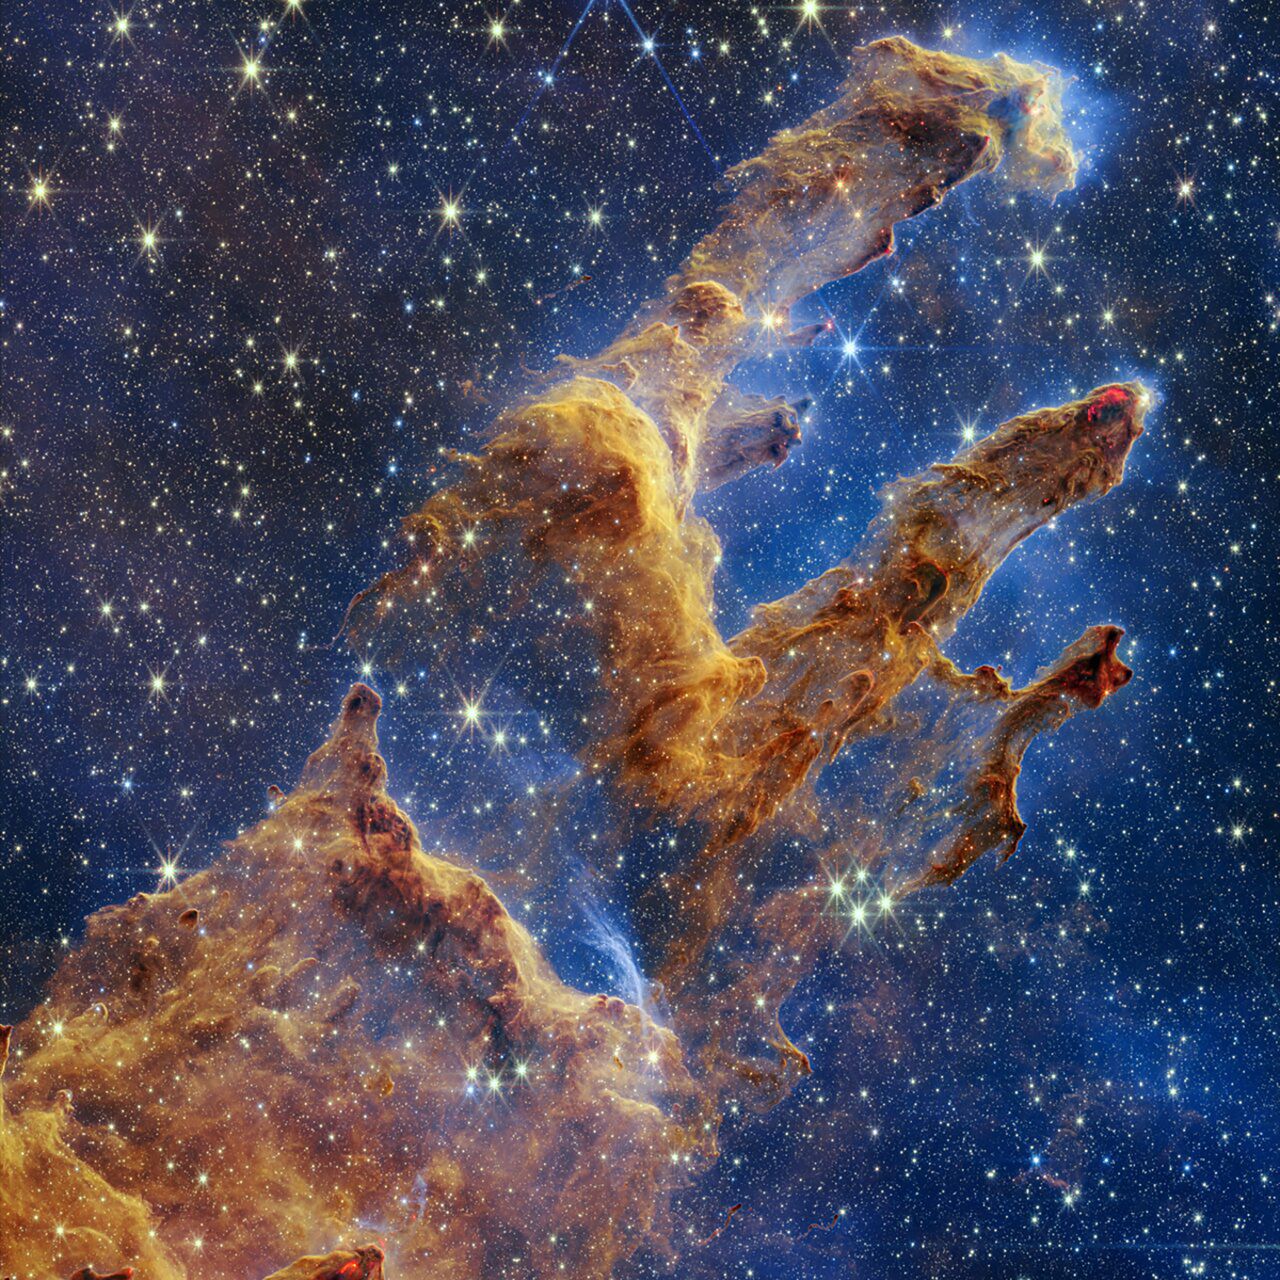 The James Webb Space Telescope captured a highly detailed snapshot of the so-called <a href="https://www.cnn.com/2022/10/19/world/webb-telescope-pillars-of-creation-scn/index.html" target="_blank">Pillars of Creation,</a> a vista of three looming towers made of interstellar dust and gas that's speckled with newly formed stars. The area, which lies within the Eagle Nebula about 6,500 light-years from Earth, had previously been captured by the Hubble Telescope in 1995, creating an image deemed "iconic" by space observers.